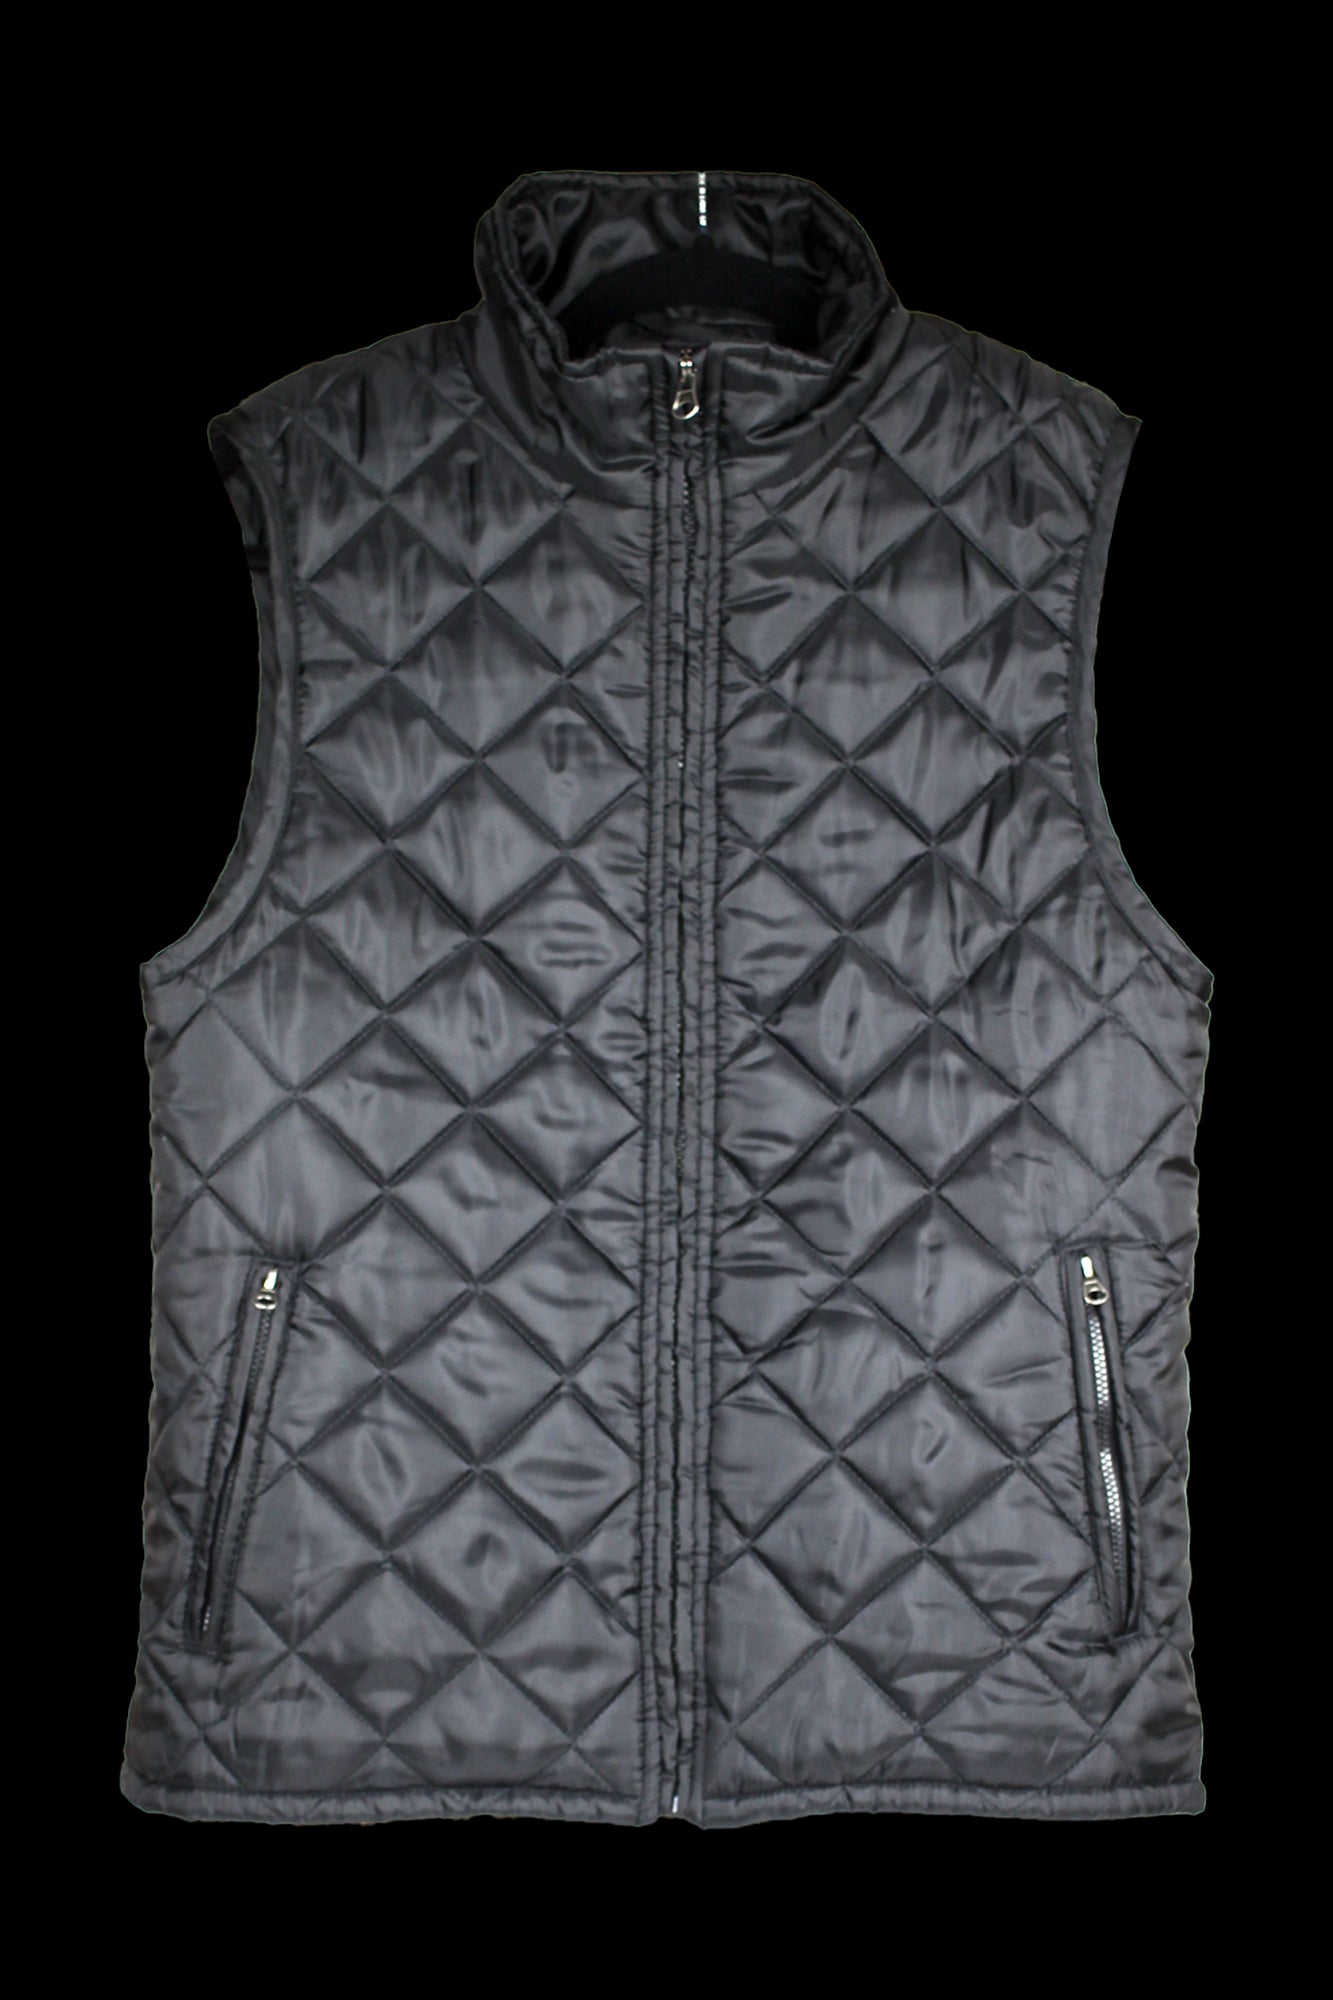 Vintage Puffer Vest - Small